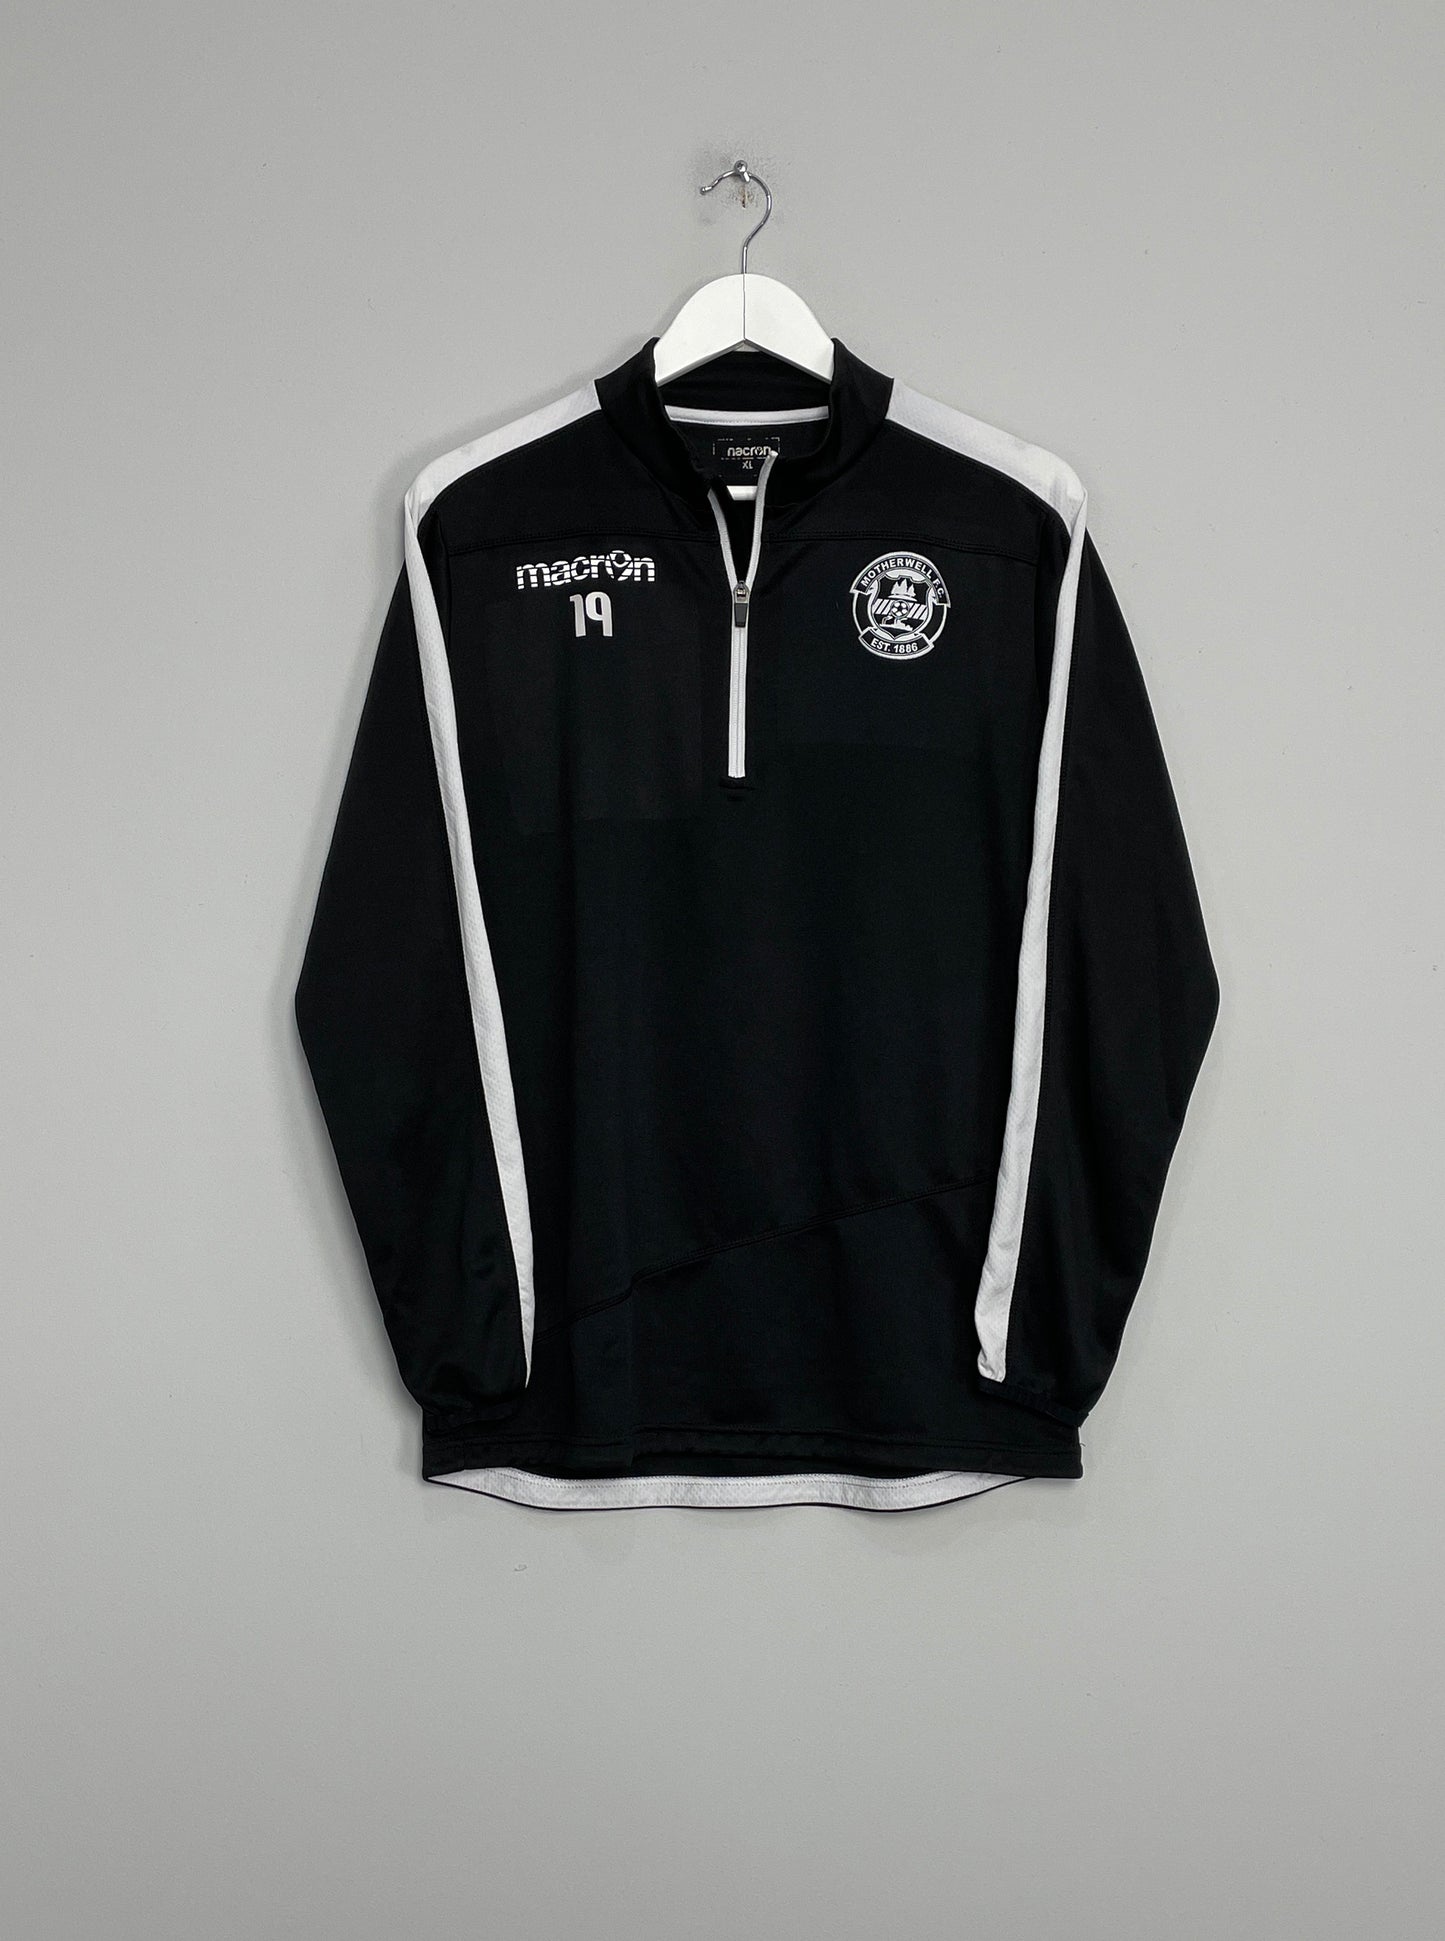 Image of the Motherwell 1/4 zip from the 2017/18 season